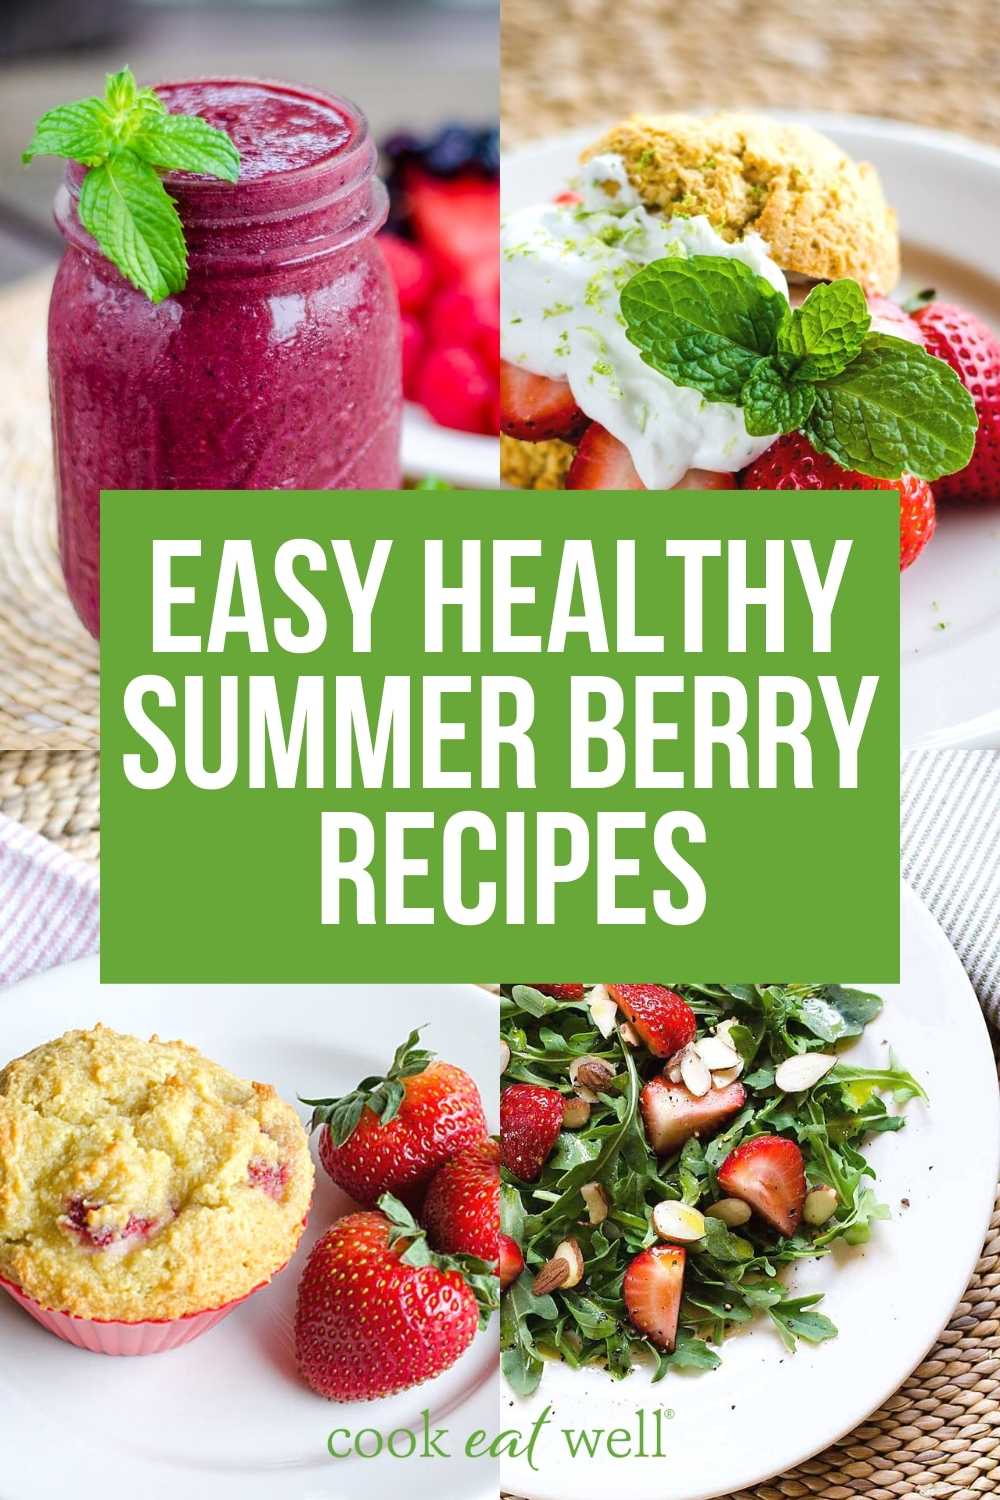 Easy healthy summer berry recipes